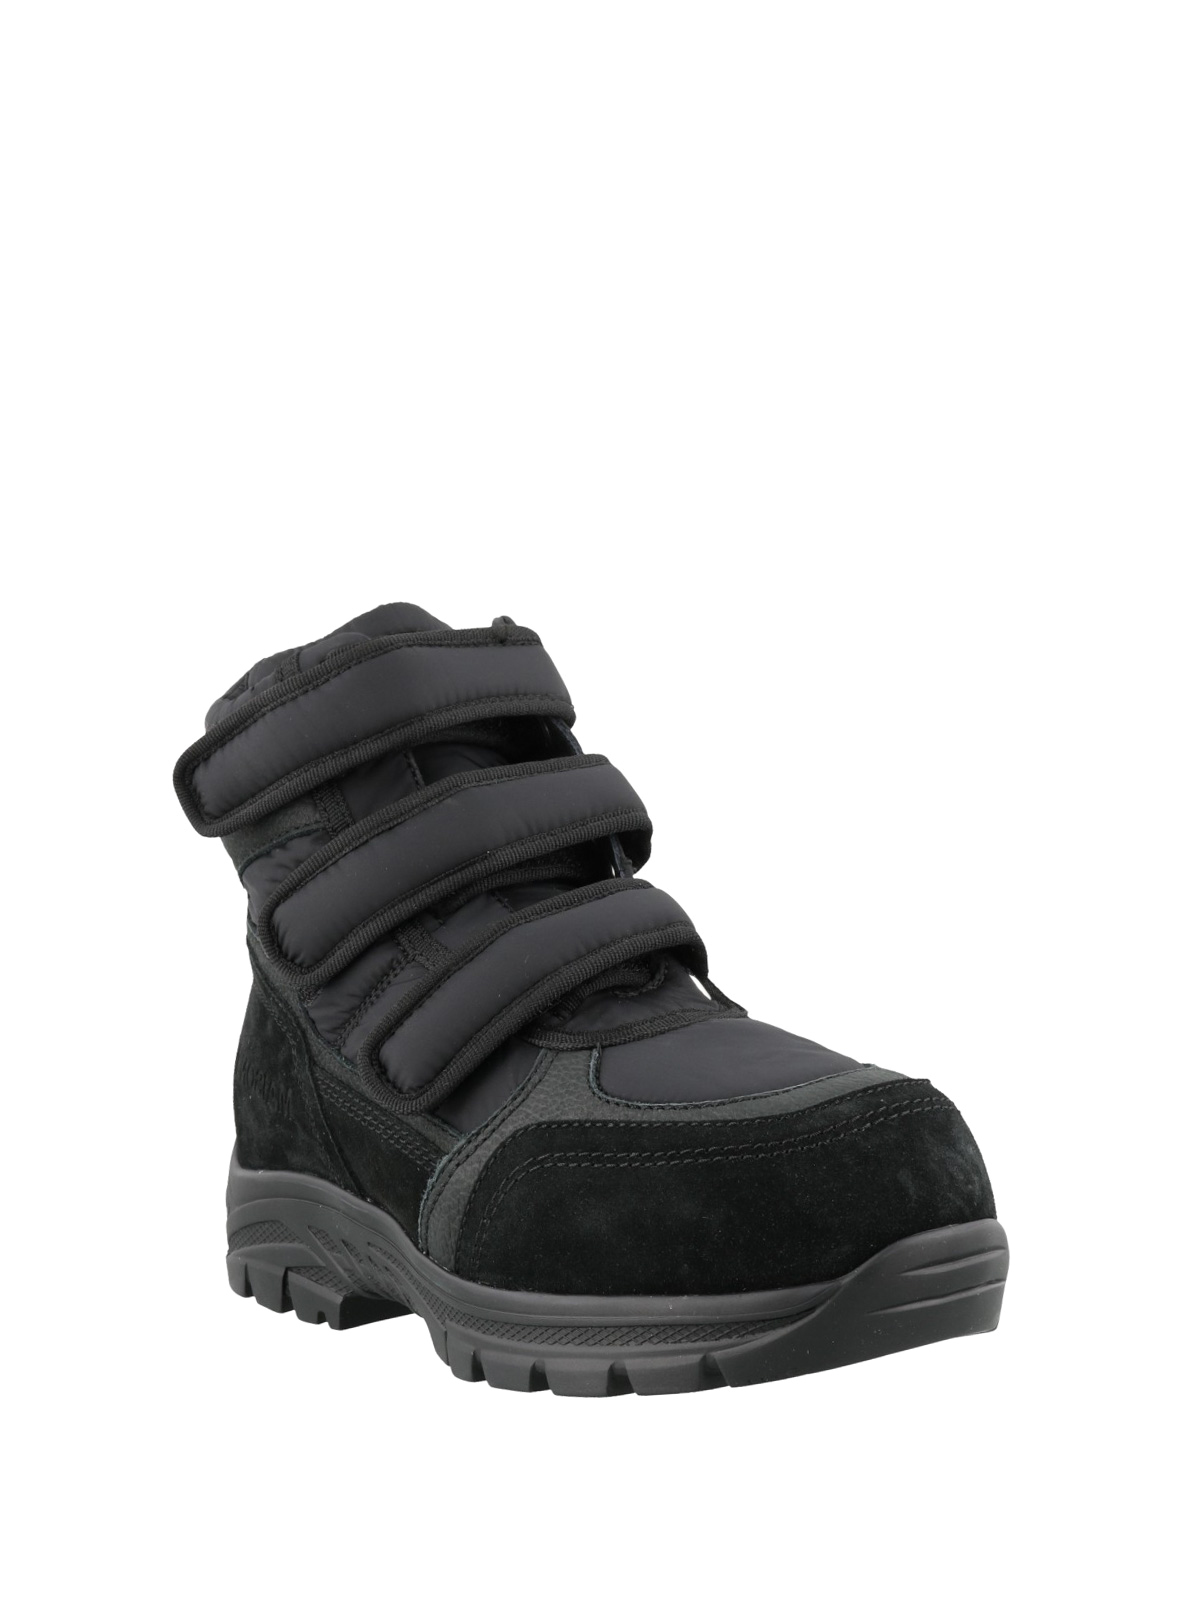 ankle boots with velcro straps